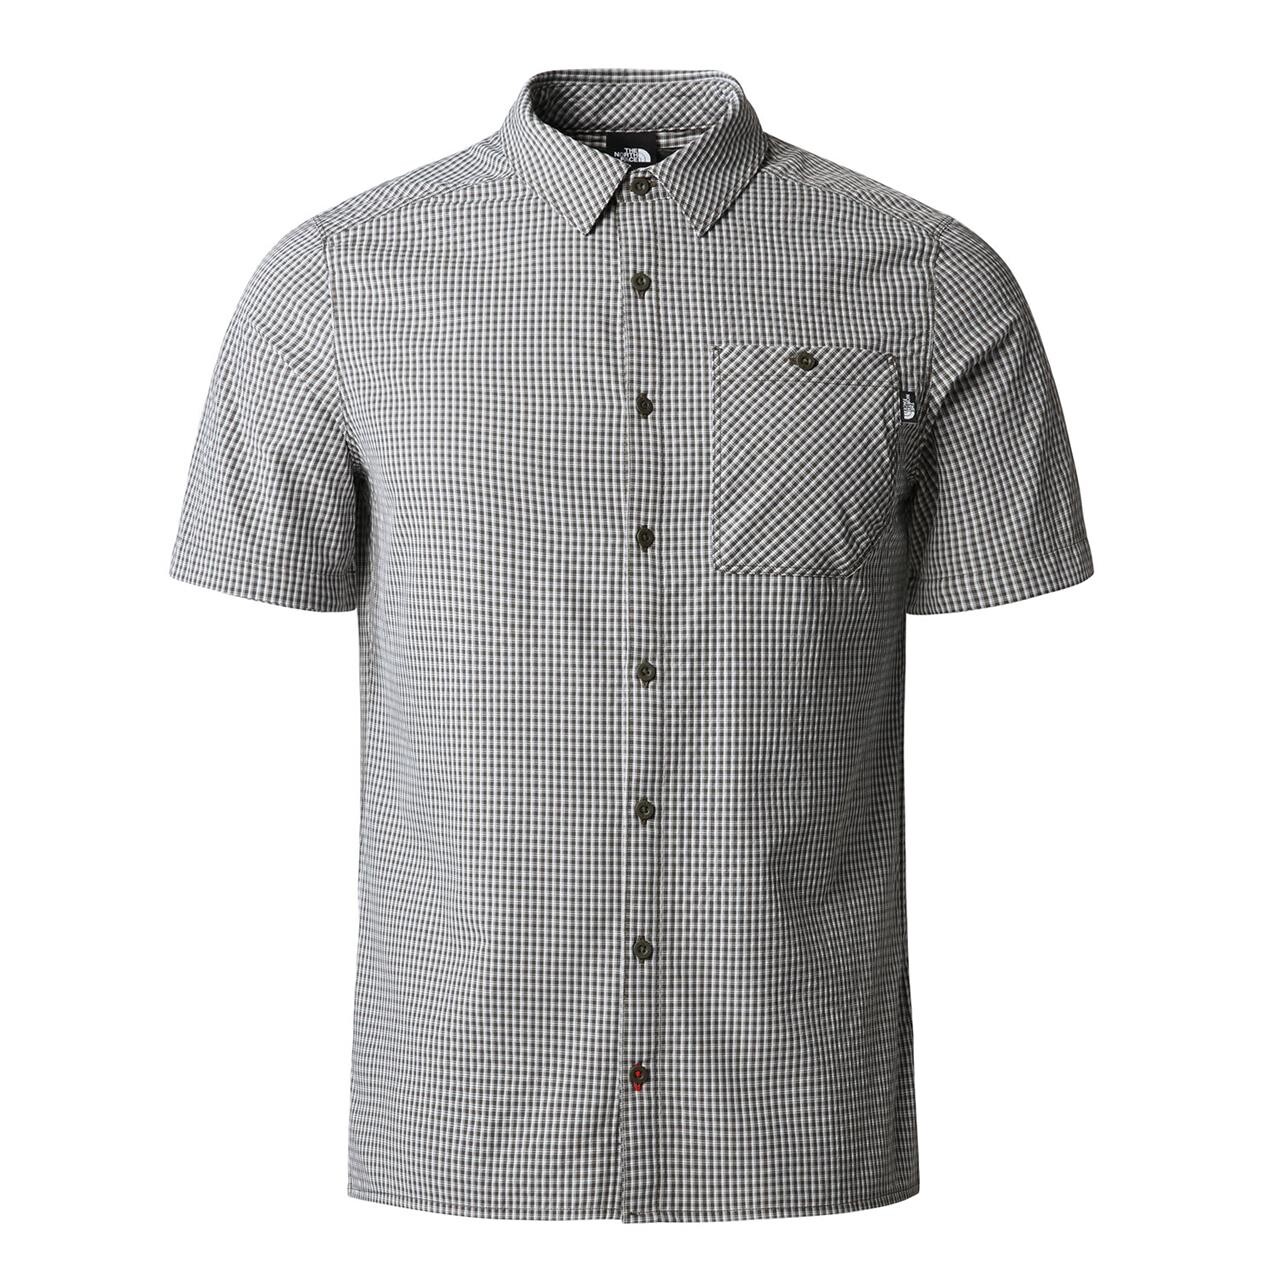 The North Face Mens S/S Hypress Shirt  (Grøn (NEW TAUPE GREEN PLAID) Medium)